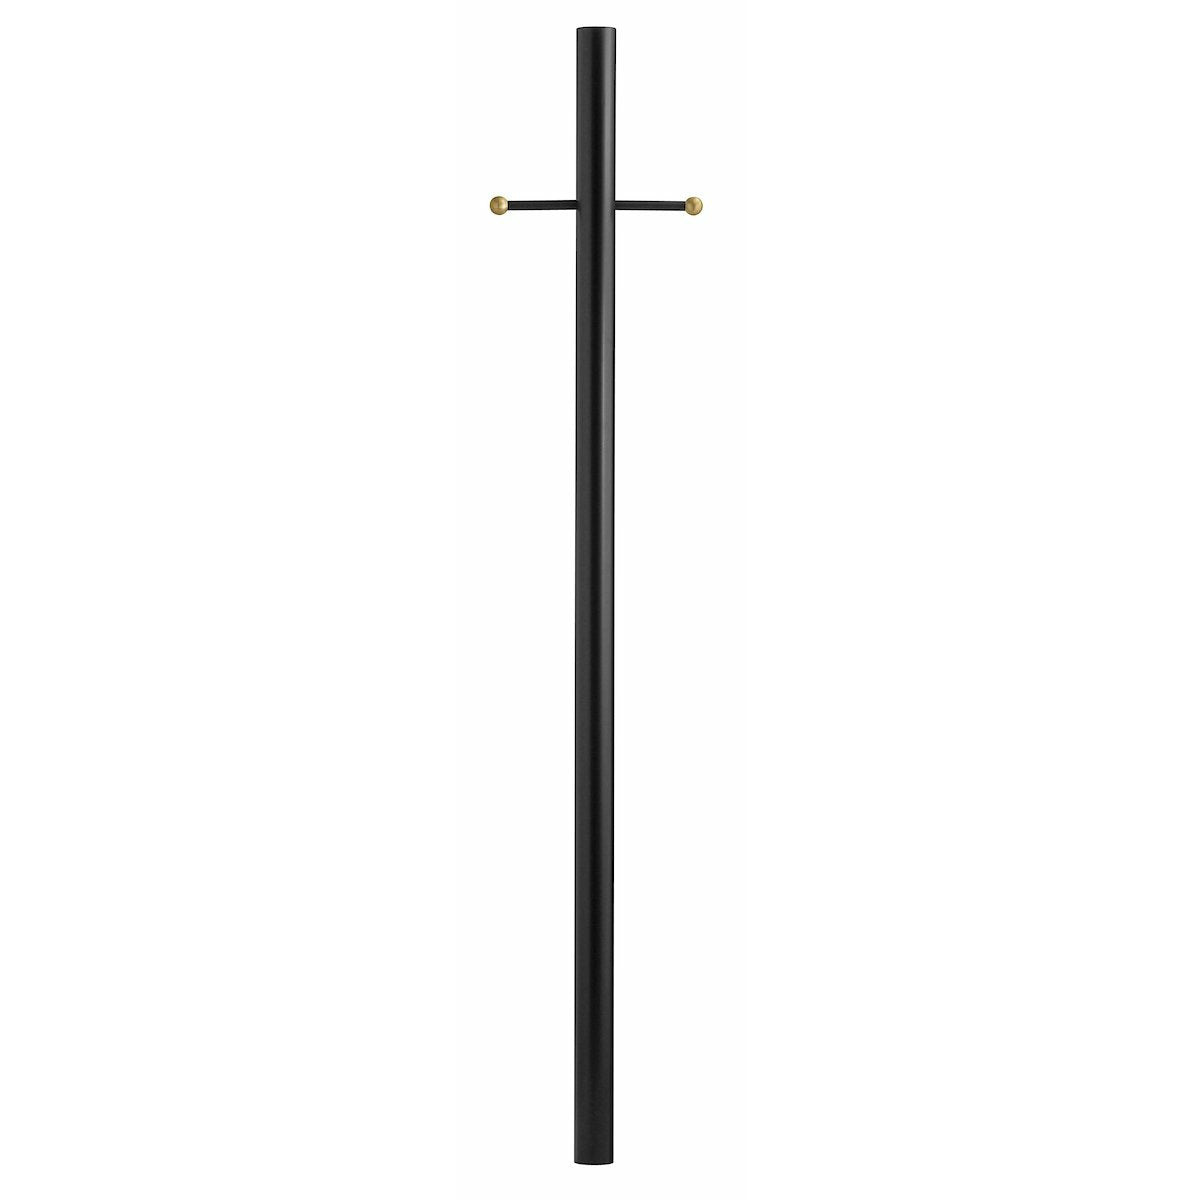 Post Direct Burial Part & Accessory Textured Black